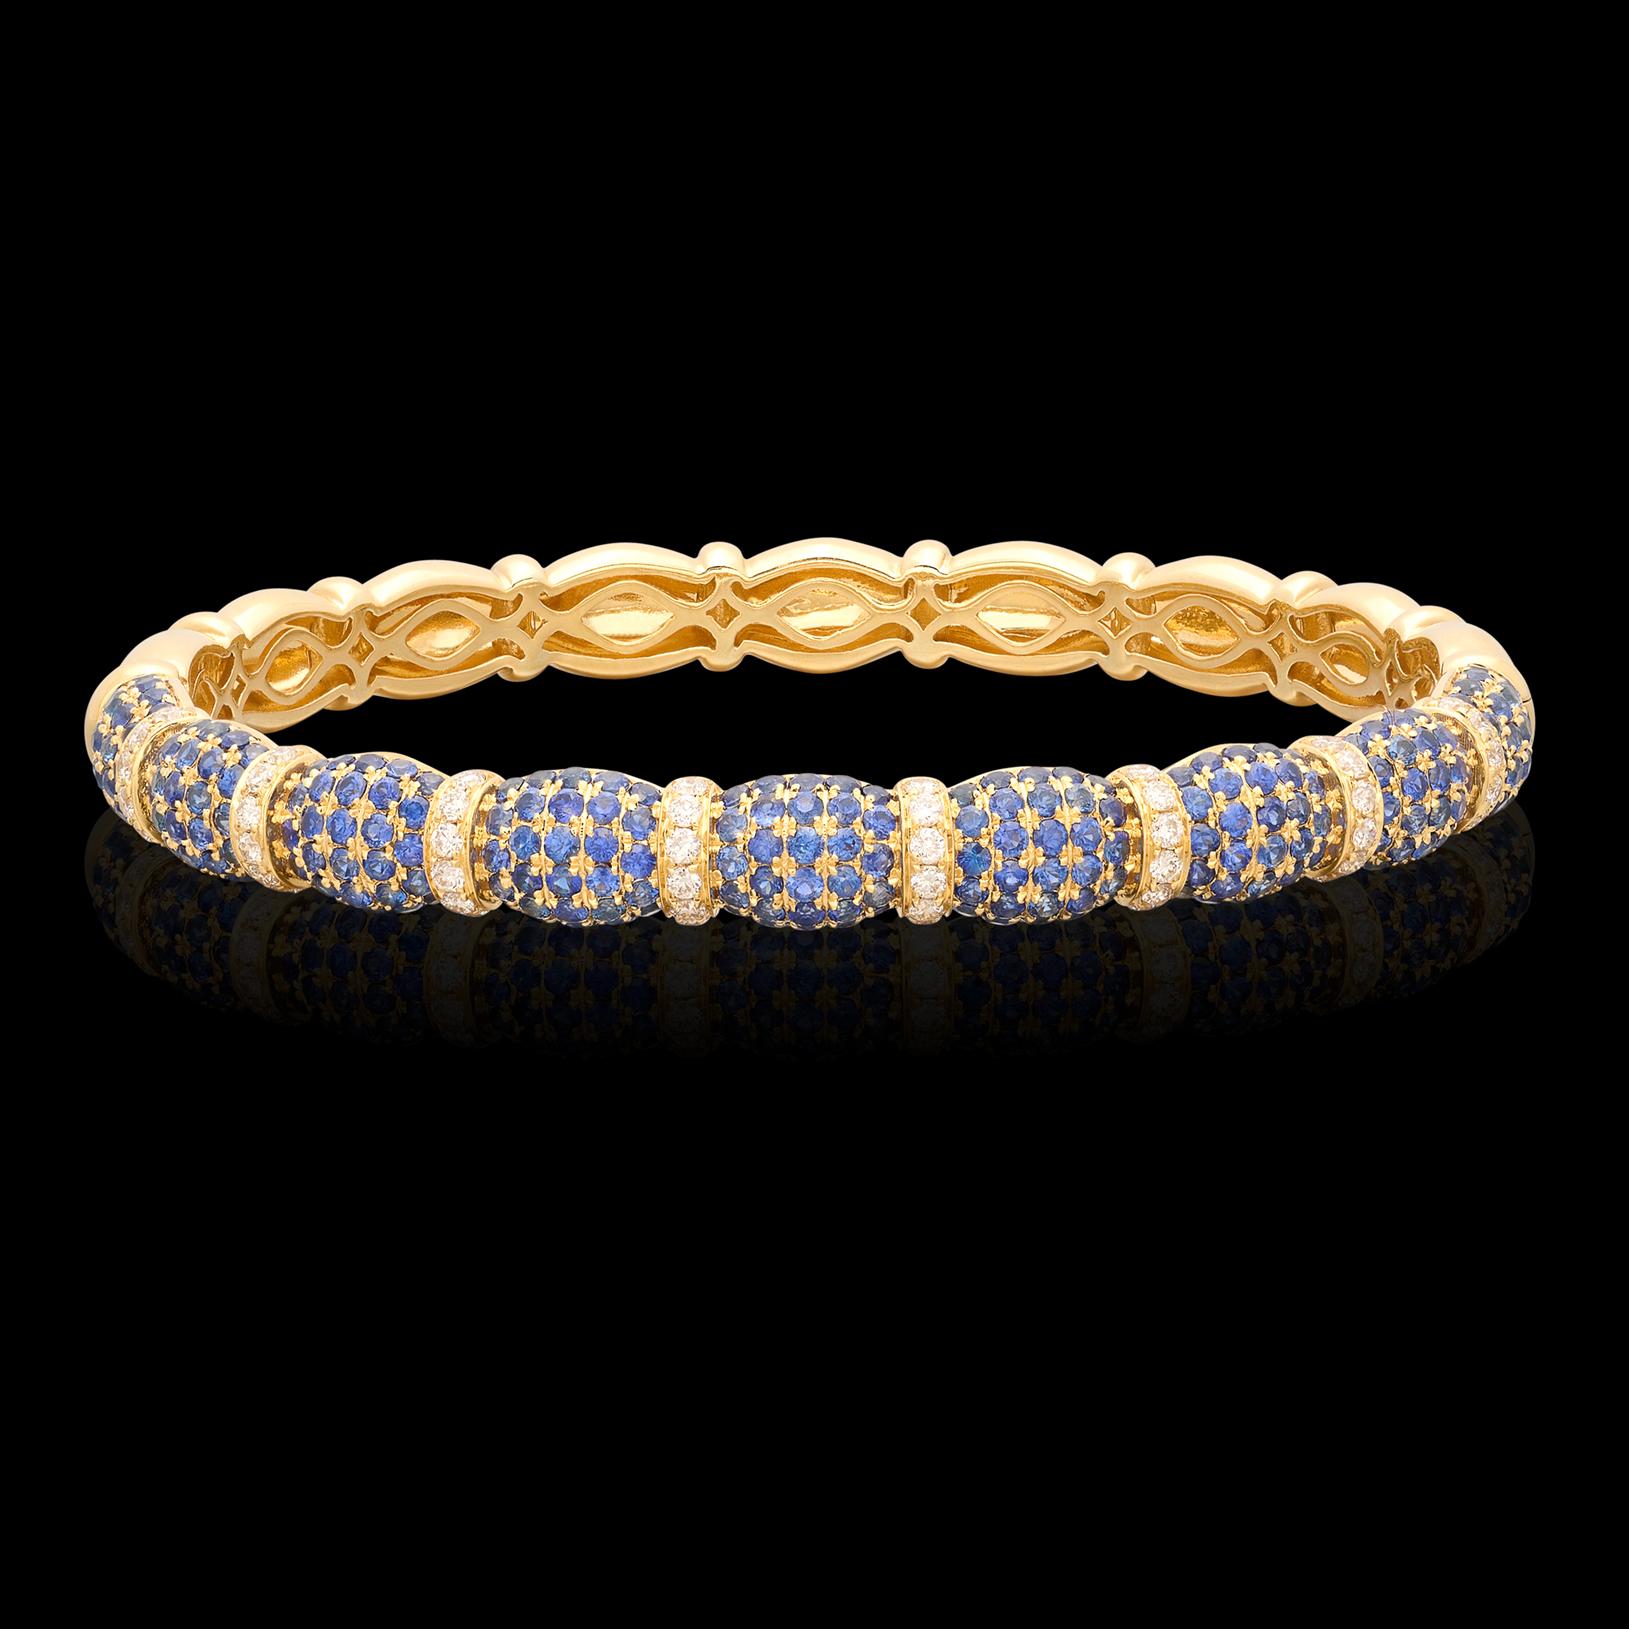 The perfect every day piece to help spruce up any outfit! This 18 karat yellow gold bangle features perfectly matched sections of fine sapphires and 0.48cttw diamonds that deliver sparkle for days. At almost half a carat, the diamonds average H